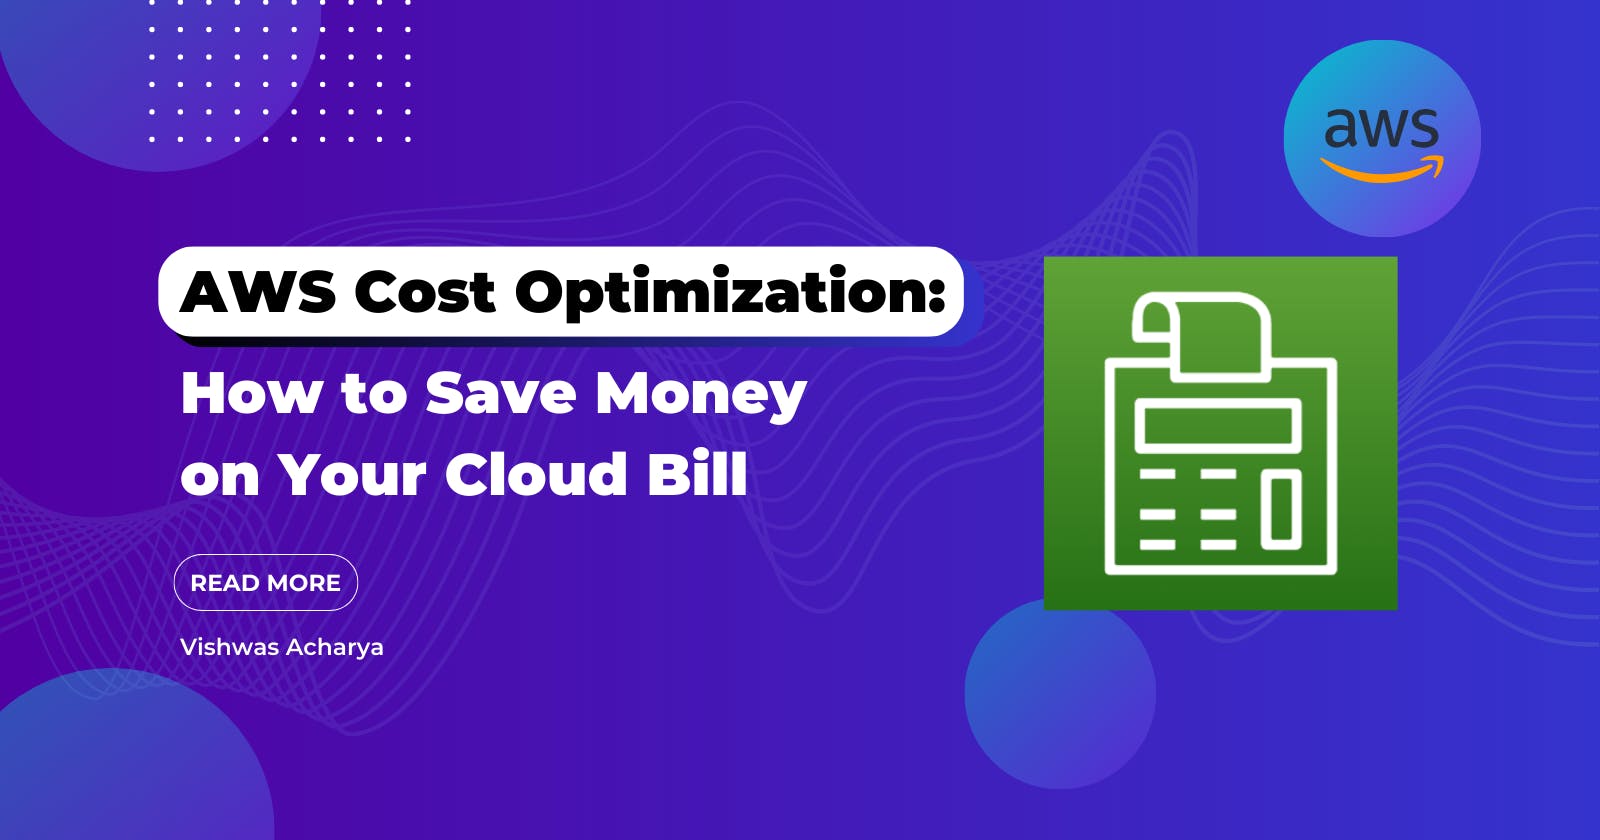 AWS Cost Optimization: How to Save Money on Your Cloud Bill